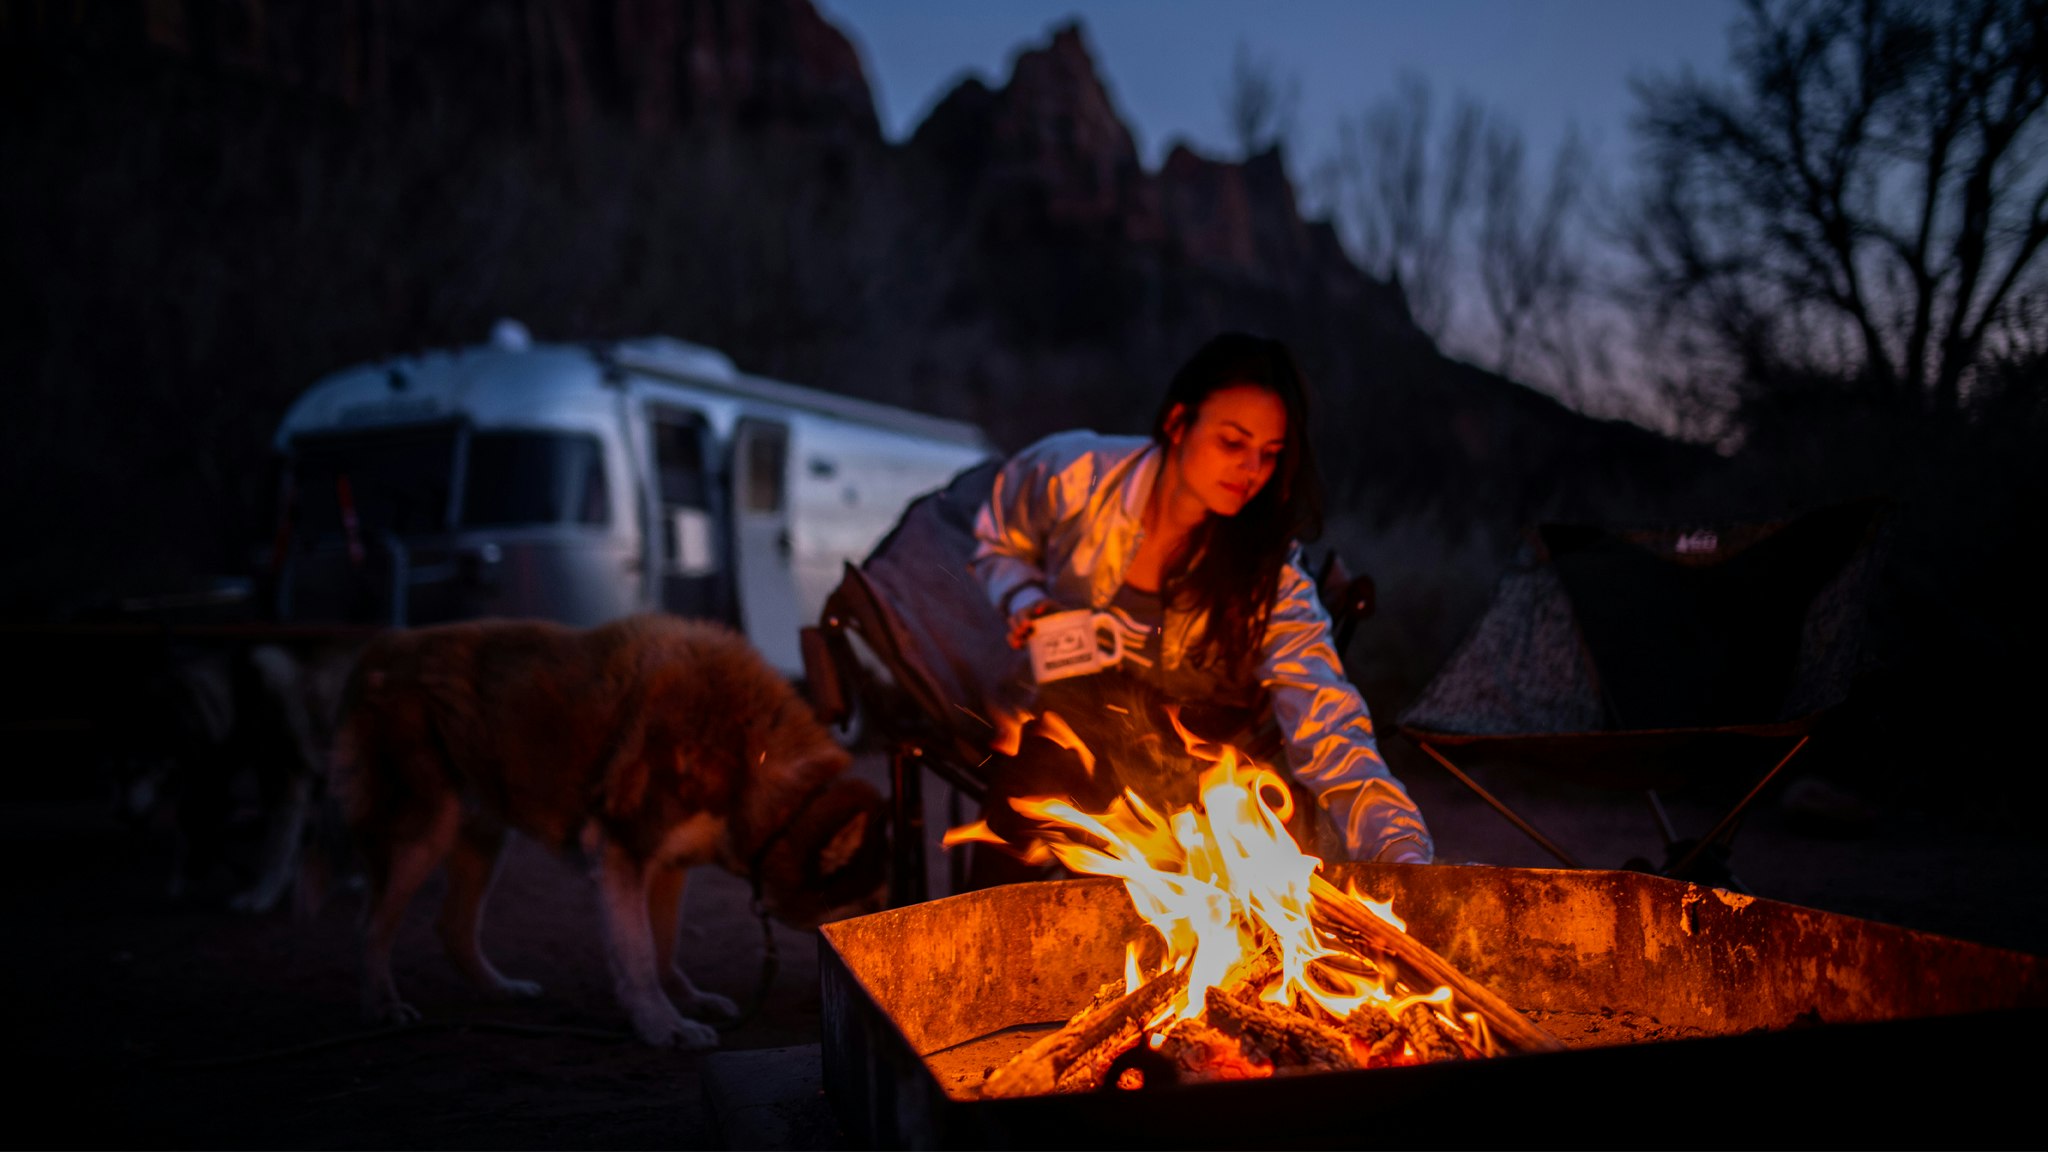 A woman sitting by a campfire with her dog